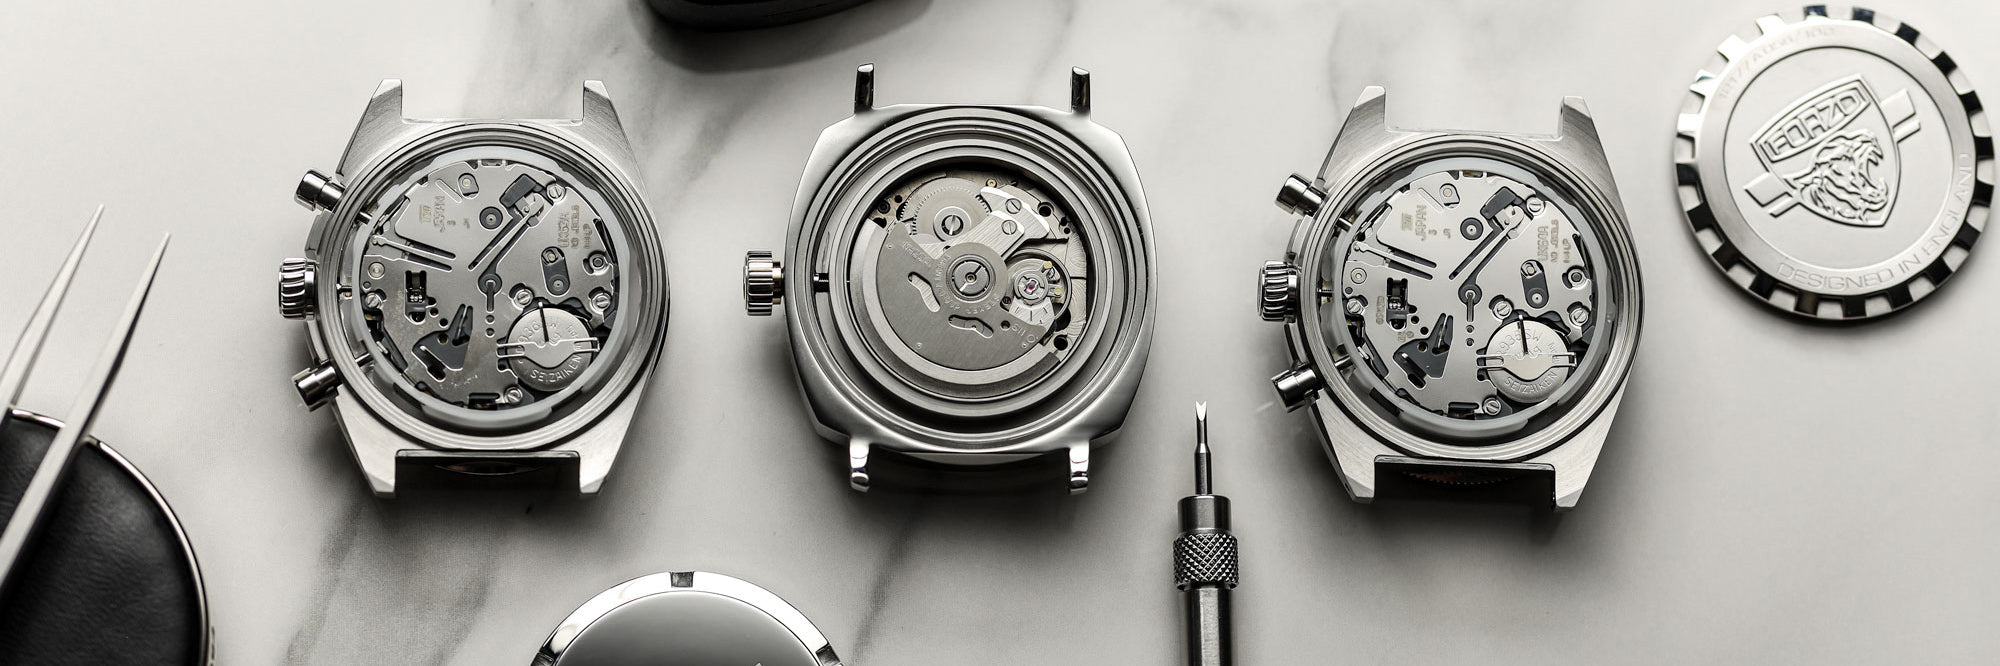 A Look at Some of Seiko’s Best Movements (& the Watches They Fuel)